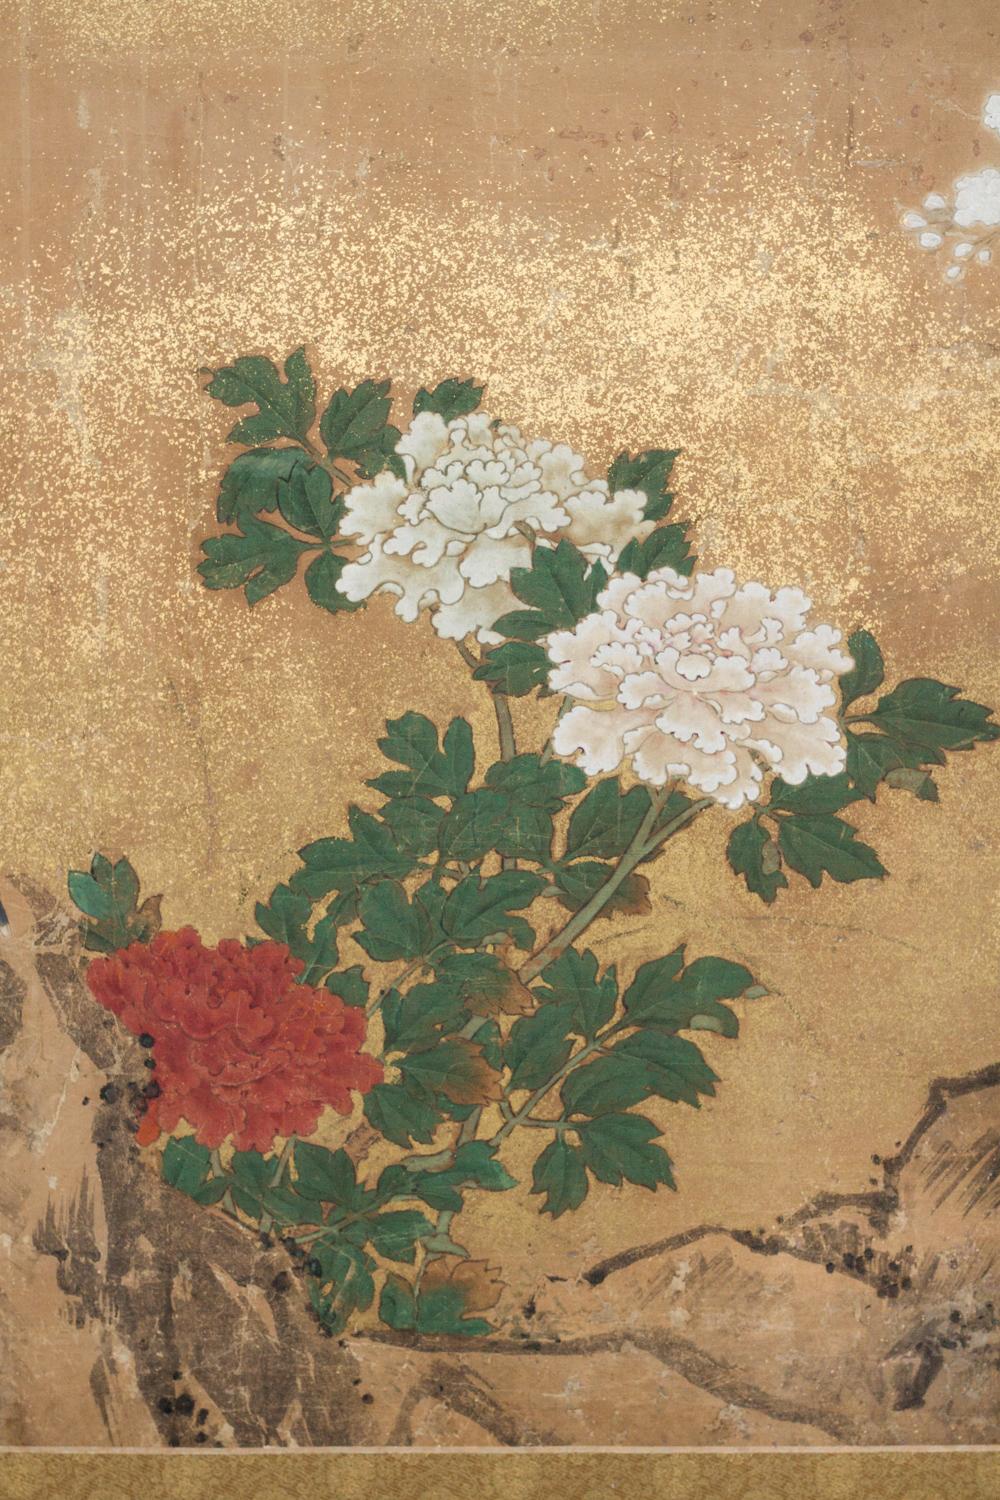 Japanese two-panel screen: Peony and Cherry, Edo period (circa 1800) painting, formerly fusuma (Japanese sliding doors), executed in the Kano school style, featuring a cherry tree in bloom, partially obscured by gold dust mist. A bird rests on the